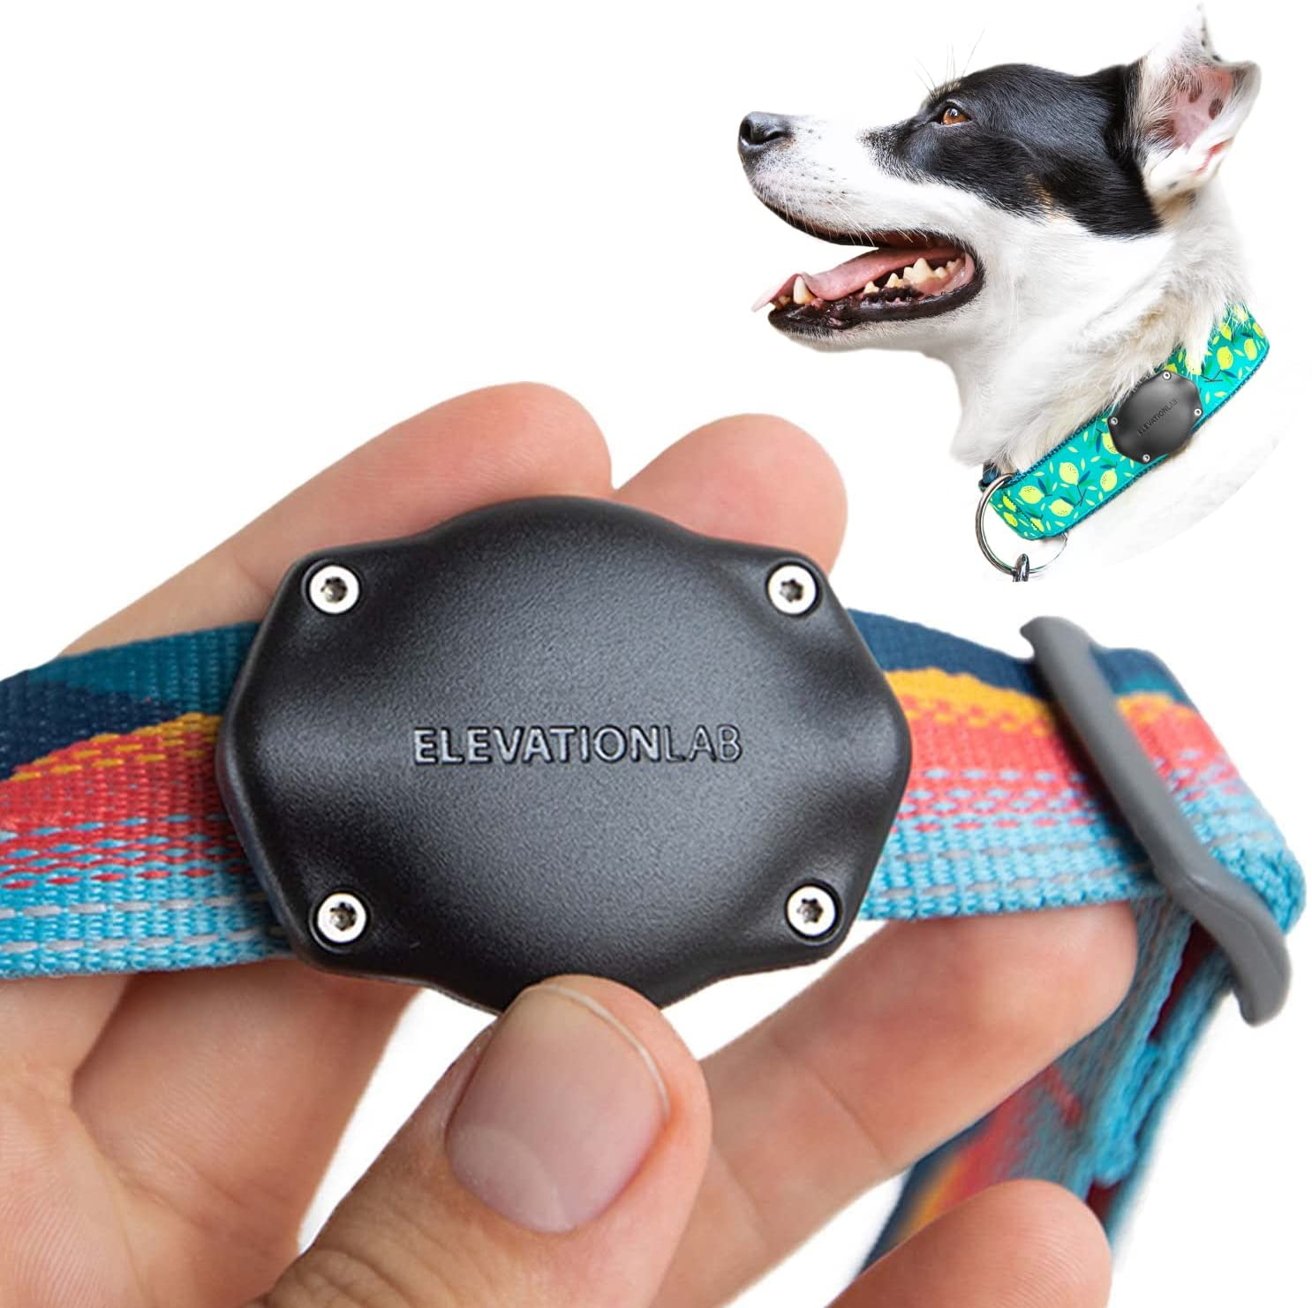 Keep tabs on your pet with an option like this, which is a case that slides onto a collar.